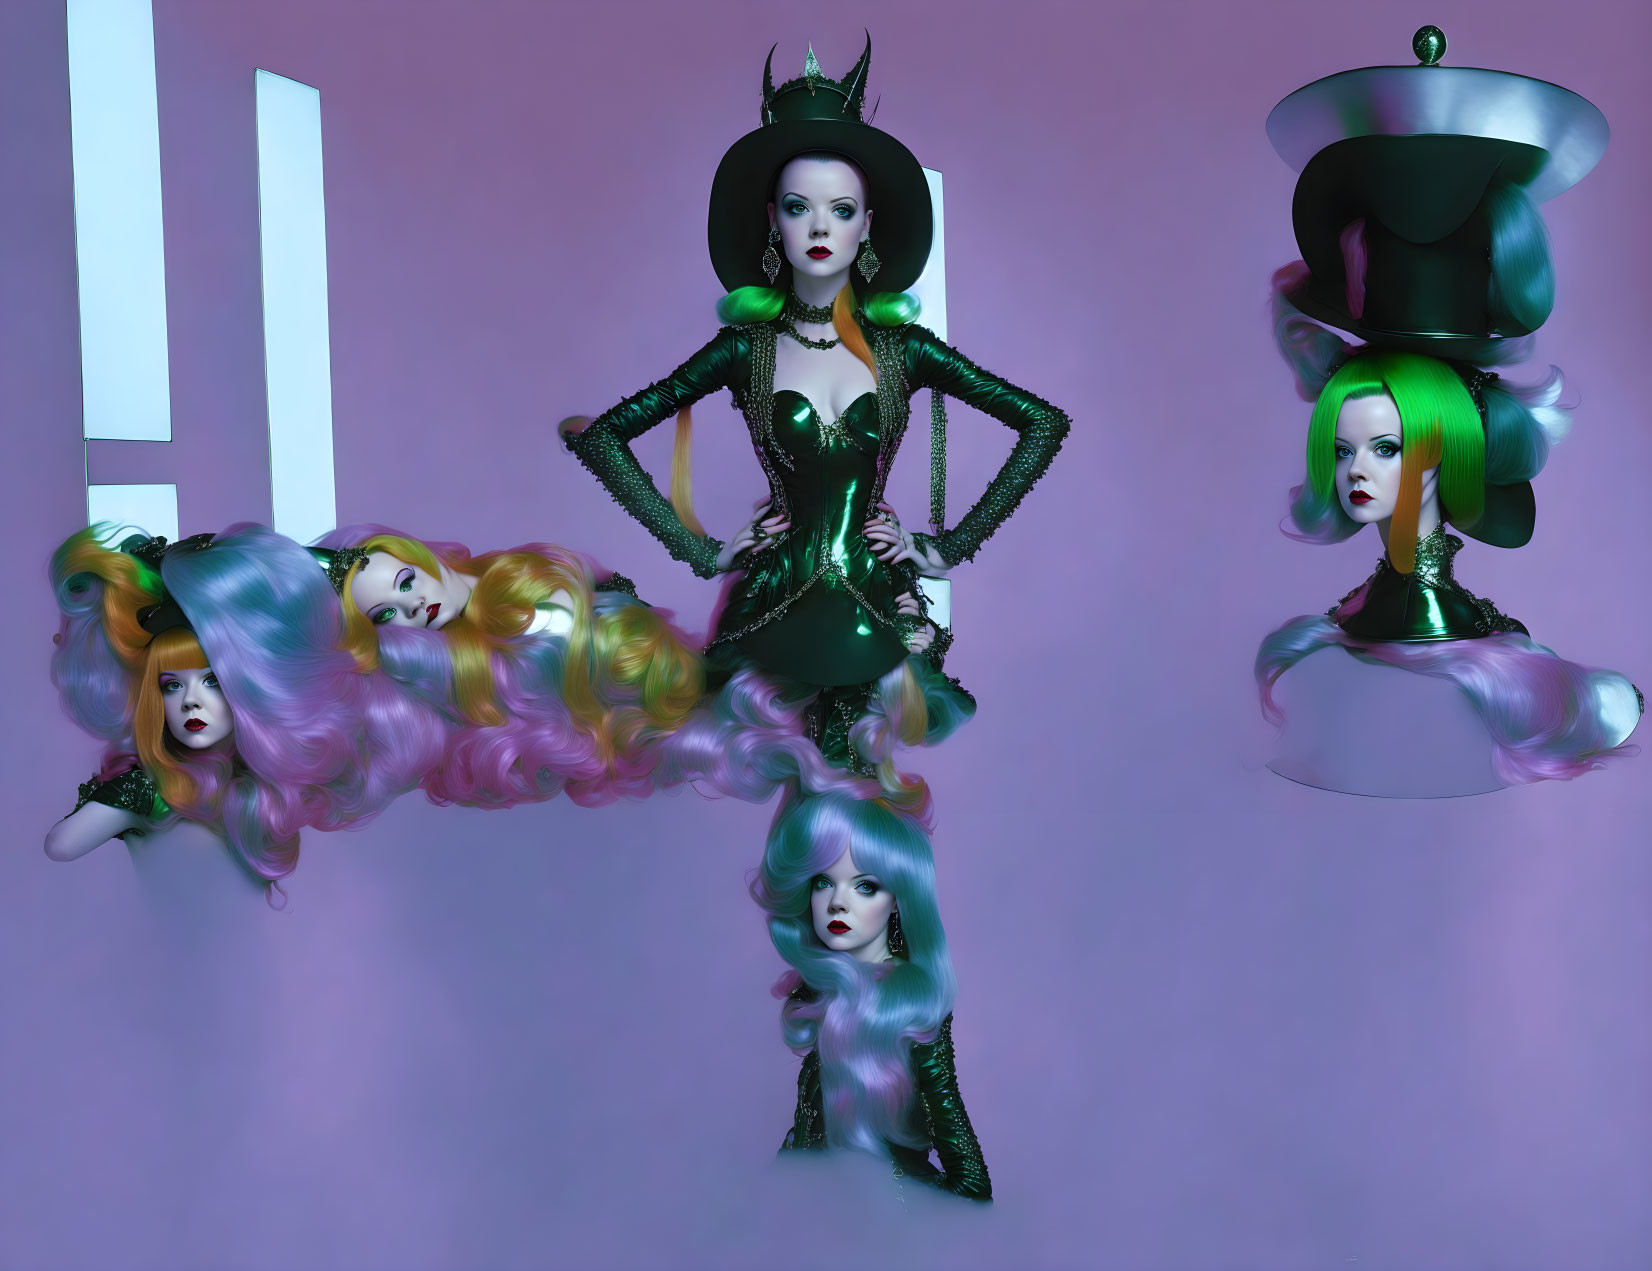 Surreal image of central figure in black costume with multiple heads in various hairstyles.